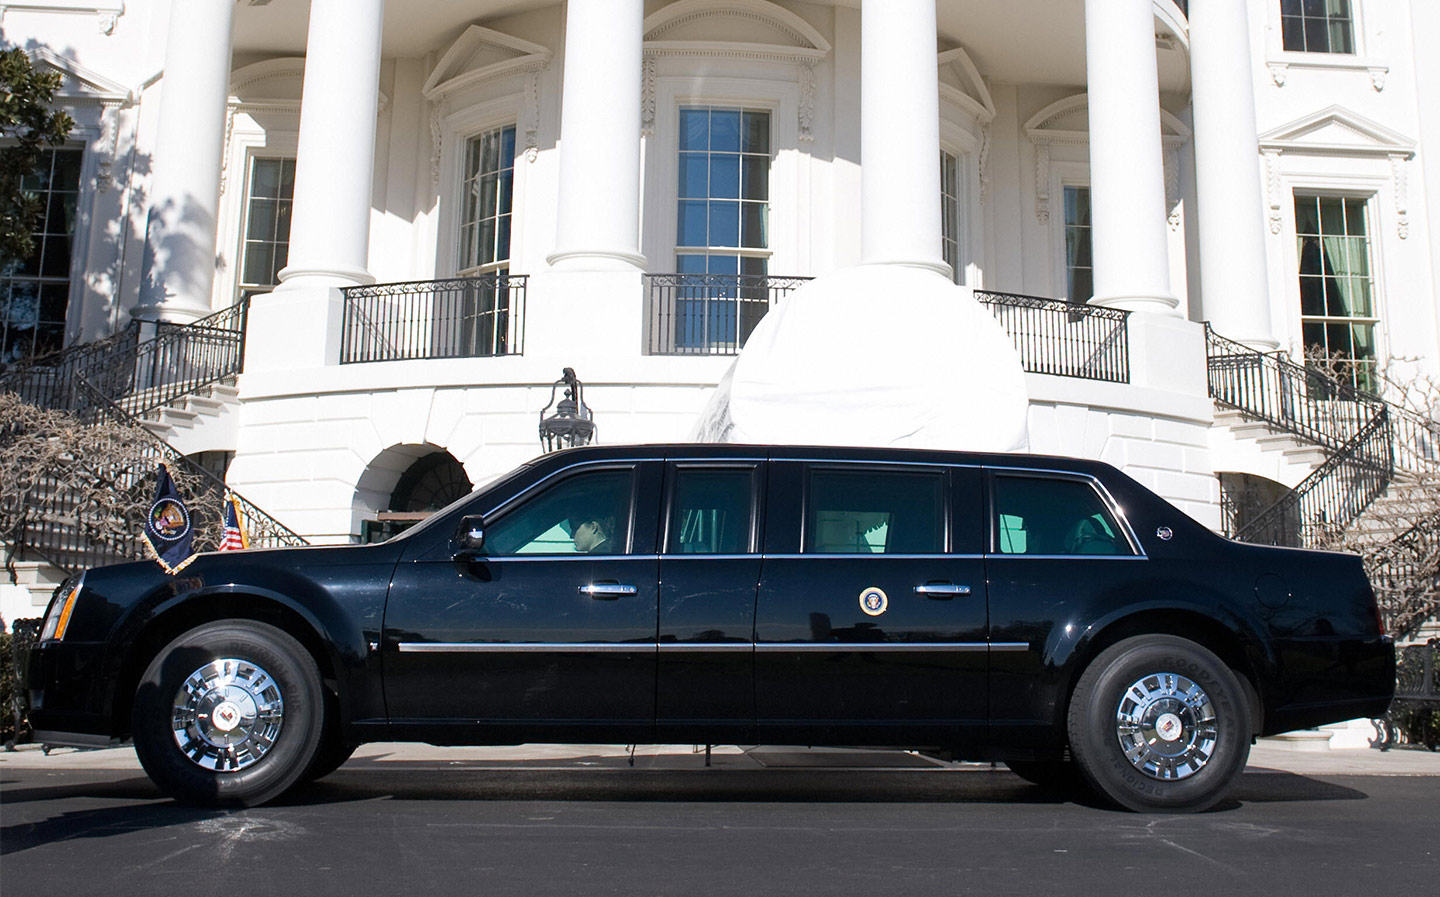 President Obama orders new armoured limousine, nicknamed The Beast